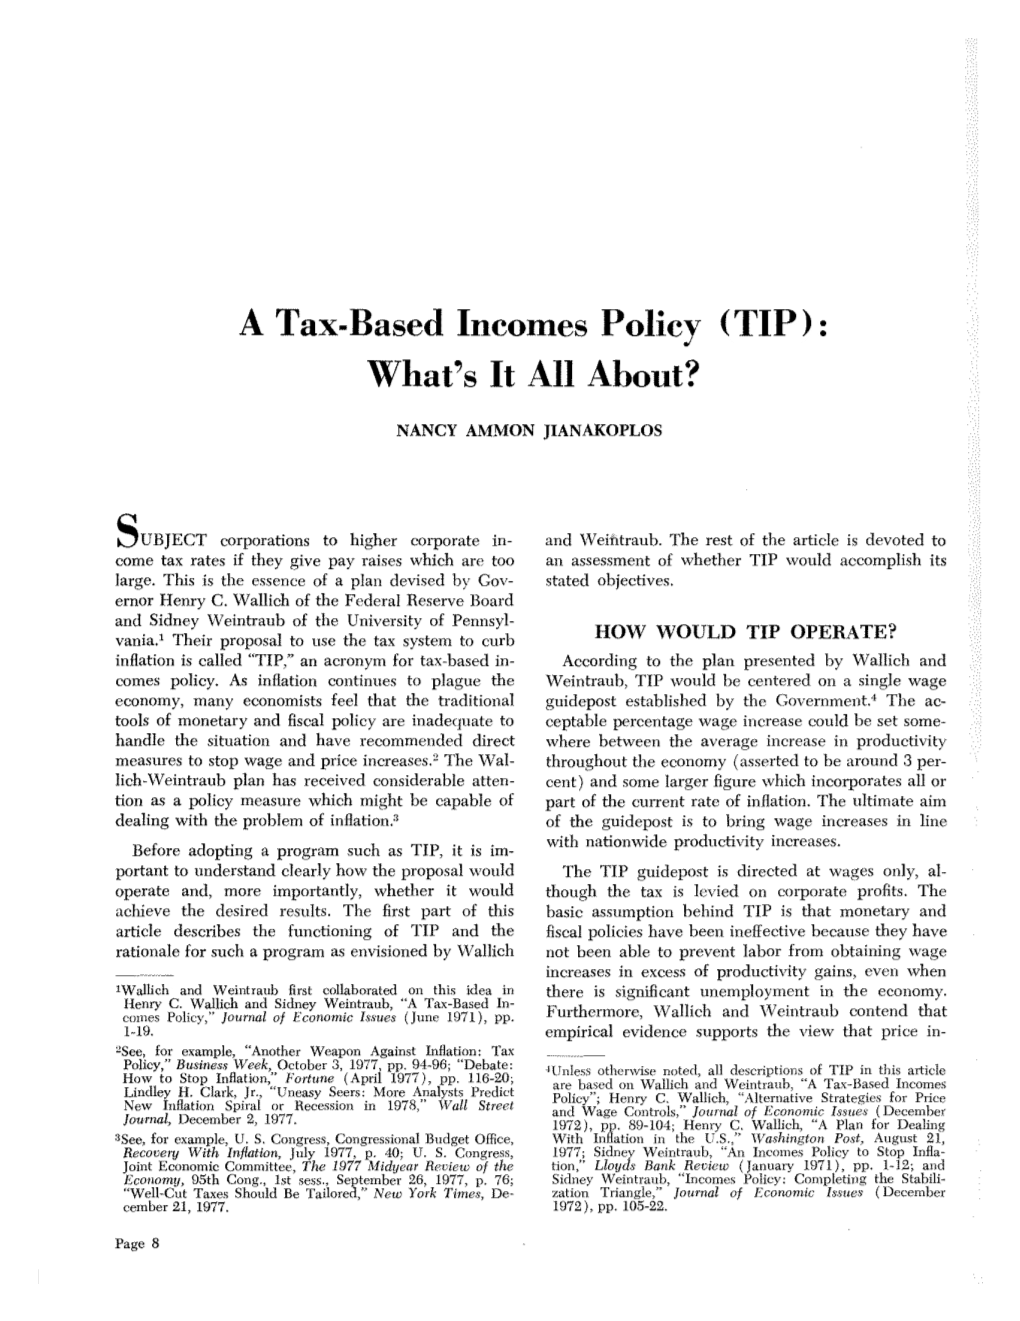 A Tax-Based Incomes Policy (TIP): What’S It All About?